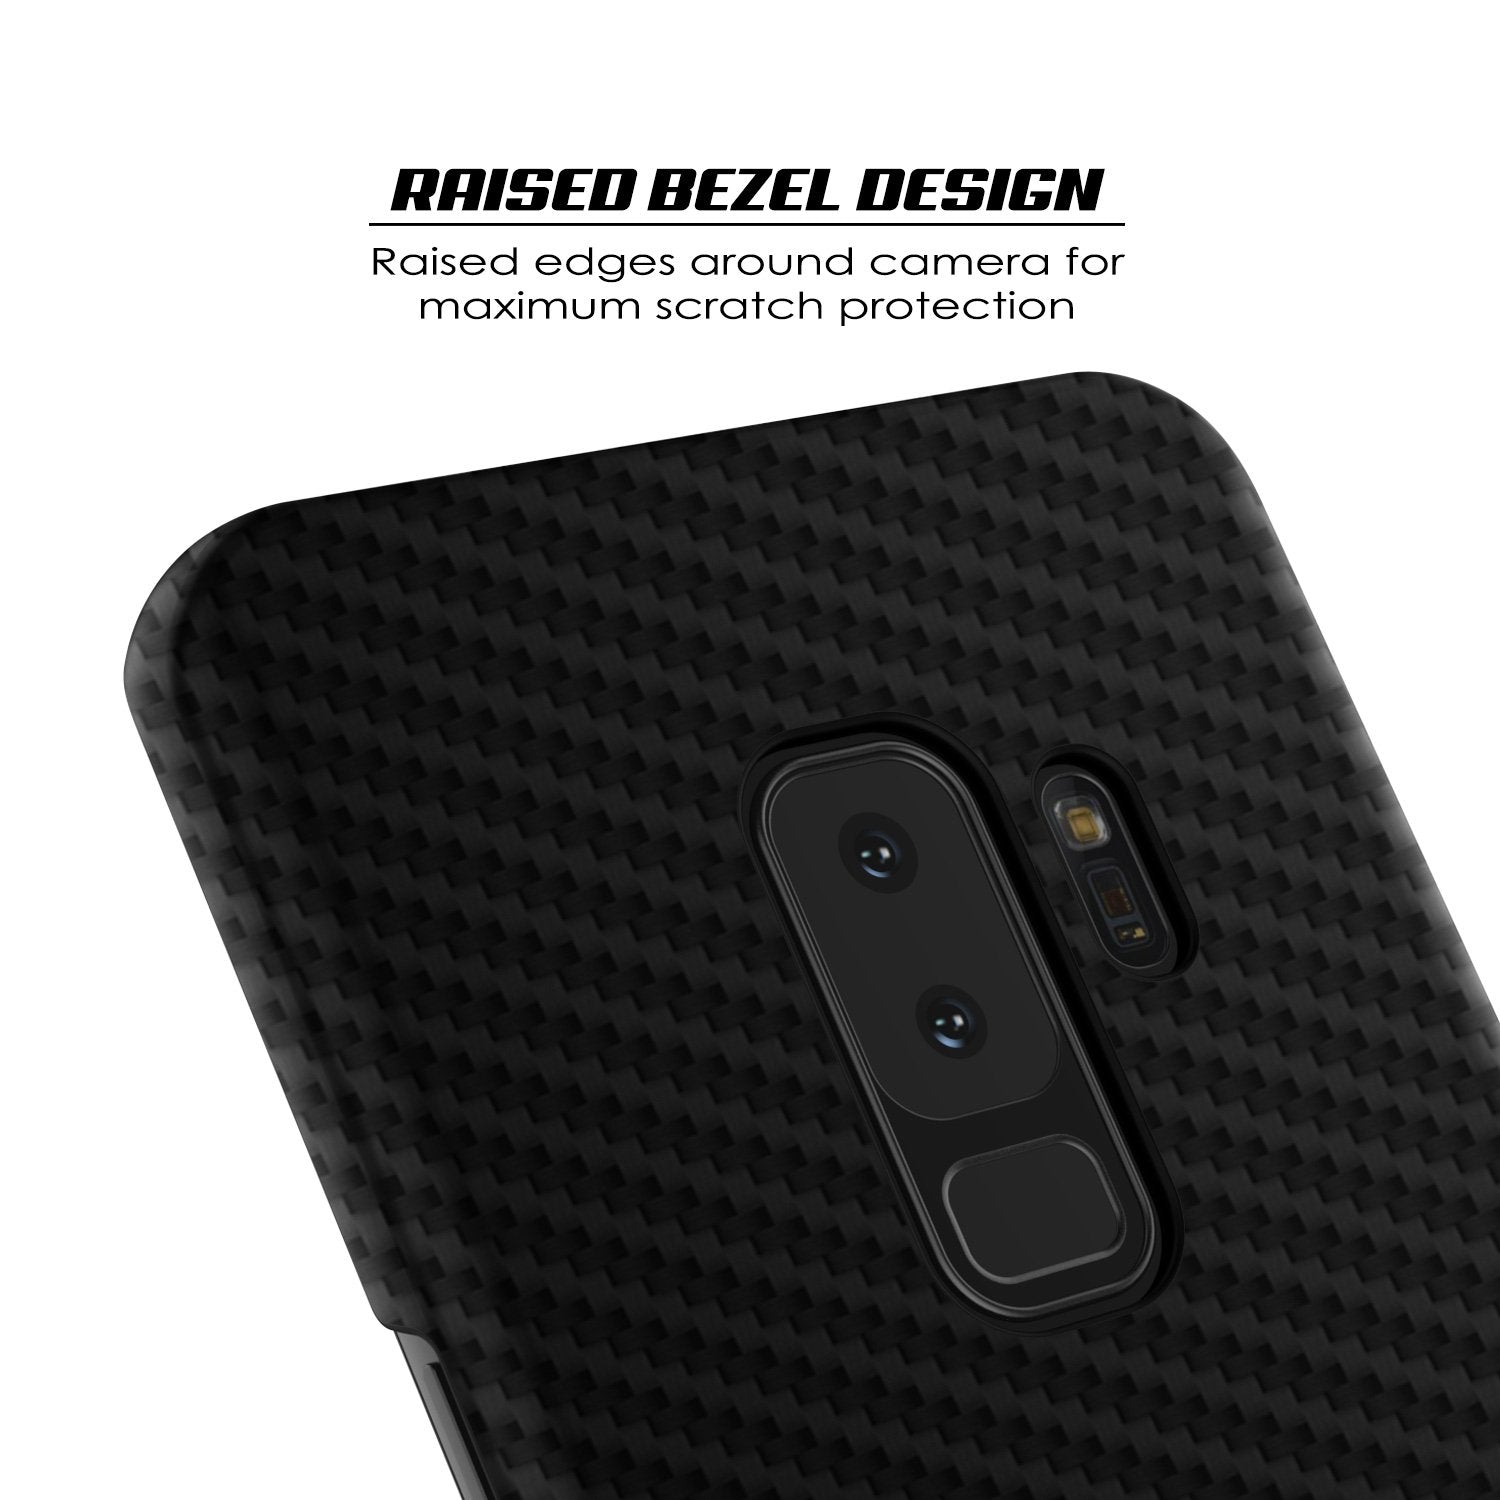 Galaxy S9 Plus Case, Punkcase CarbonShield, Heavy Duty & Ultra Thin 2 Piece Dual Layer PU Leather Jet Black Cover